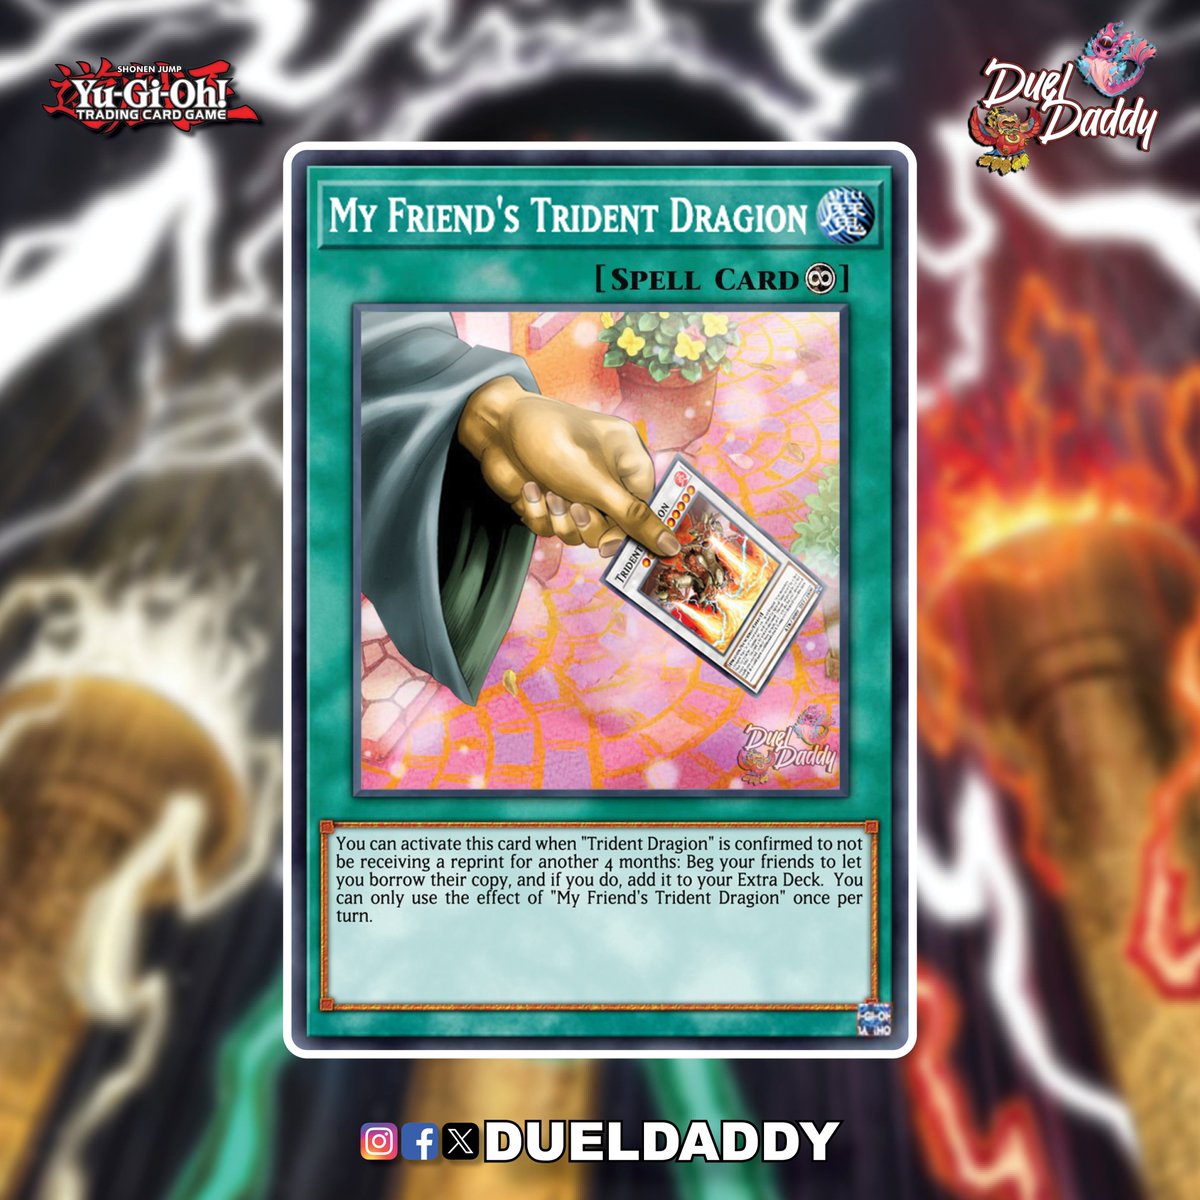 ~*CALL YOUR BFF*~ 
Tenpai players have been abandoned for 4 more months, so it looks like they have to rely on their BFF to help them complete their Deck for an upcoming YCS or WCS! 

Synchro Summon this 15 year old card and overwhelm your opponent with the power of friendship!